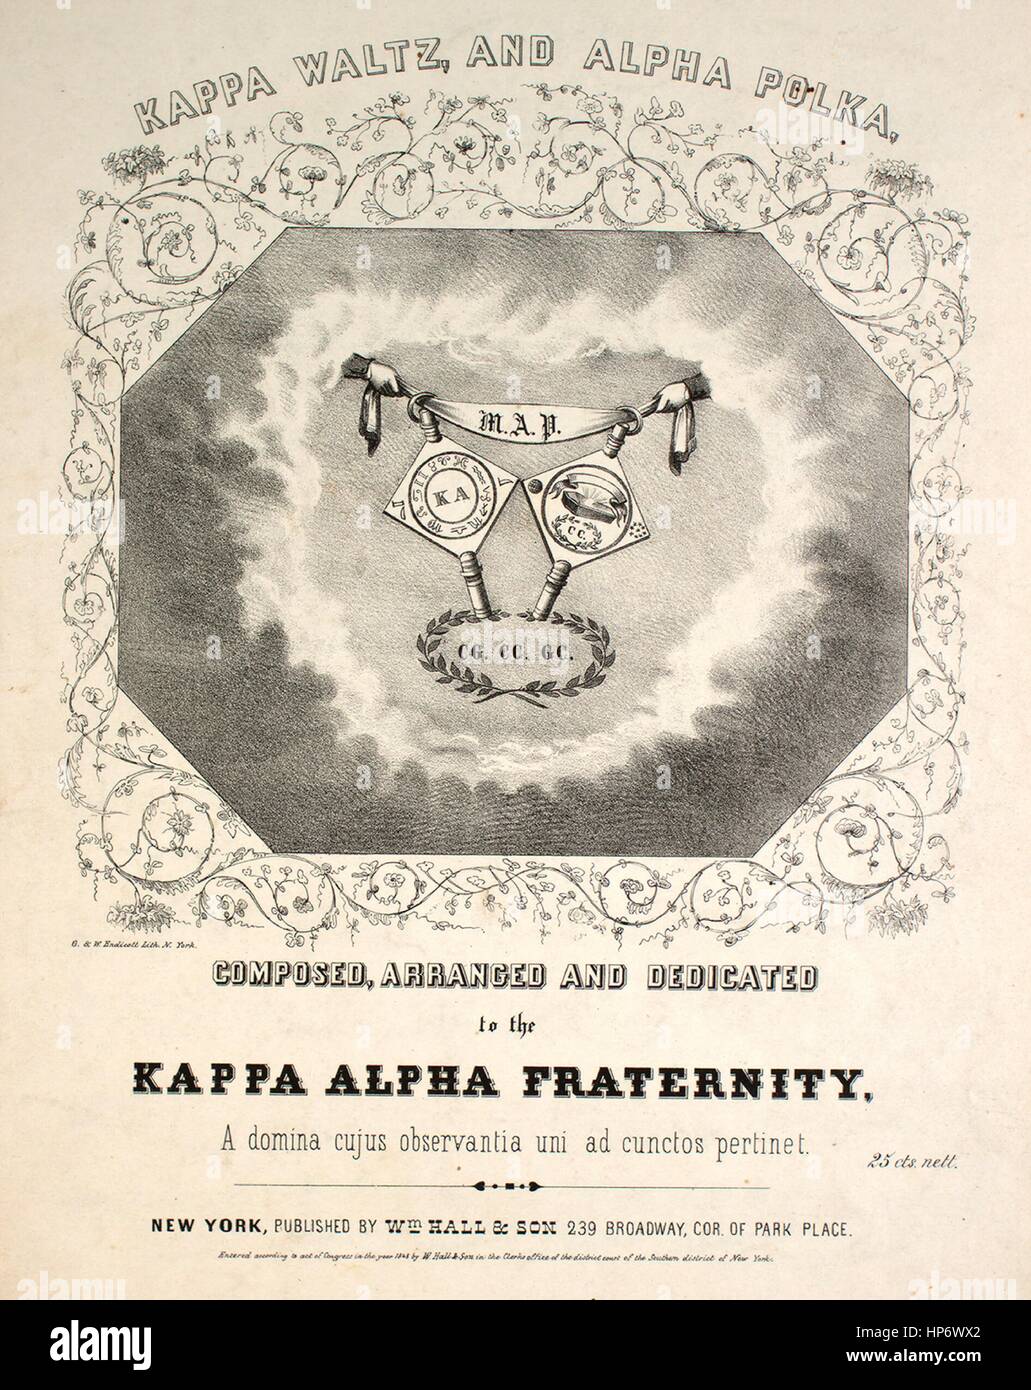 Sheet music of the song 'Kappa Waltz, and Alpha Polka', with original authorship notes reading 'na', United States, 1848. The publisher is listed 'Wm. Hall and Son, Broadway,